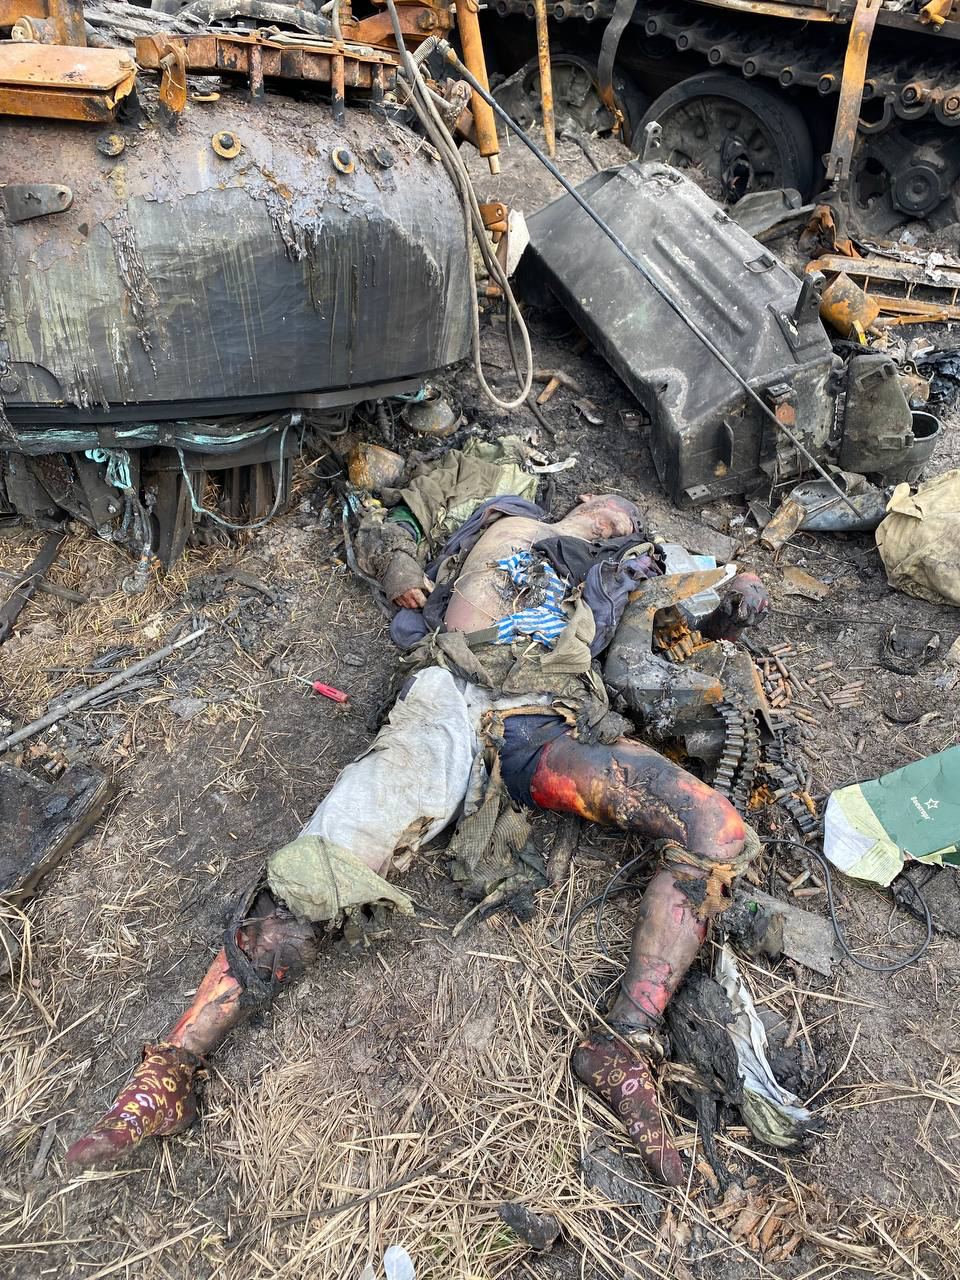 The corpse of a Russian military against the background of destroyed armored vehicles